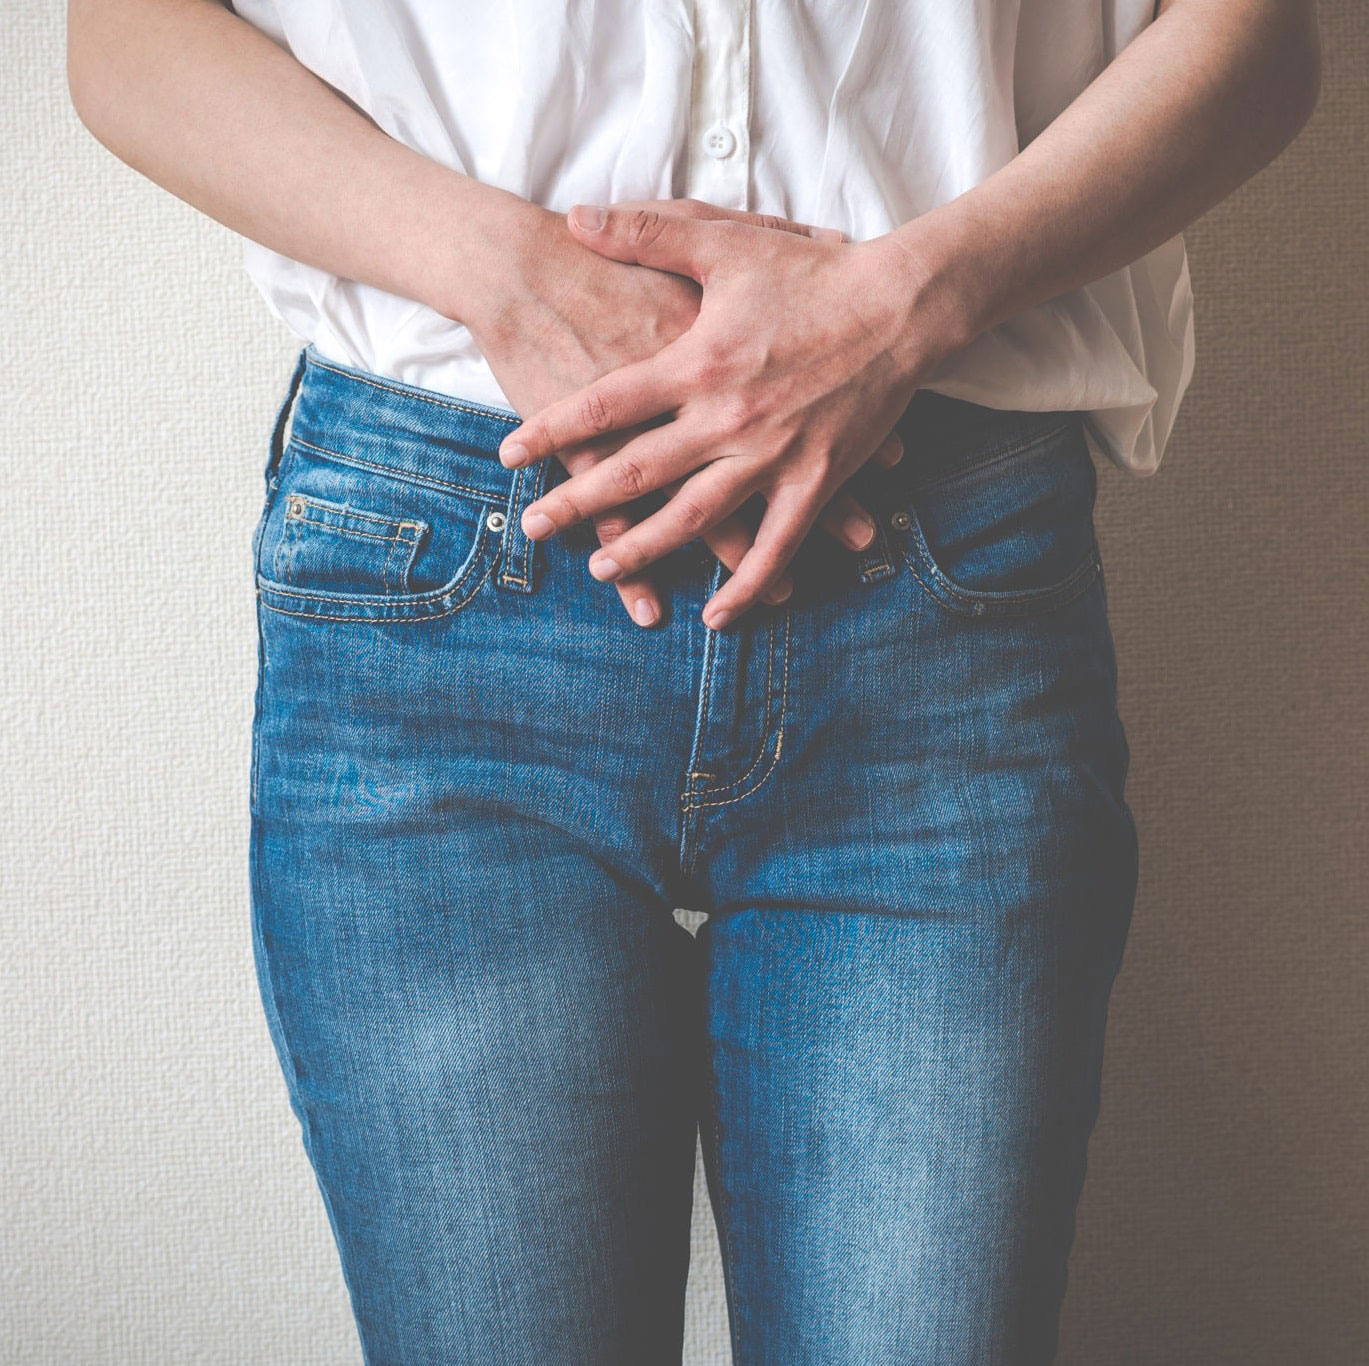 how-to-get-rid-of-a-uti